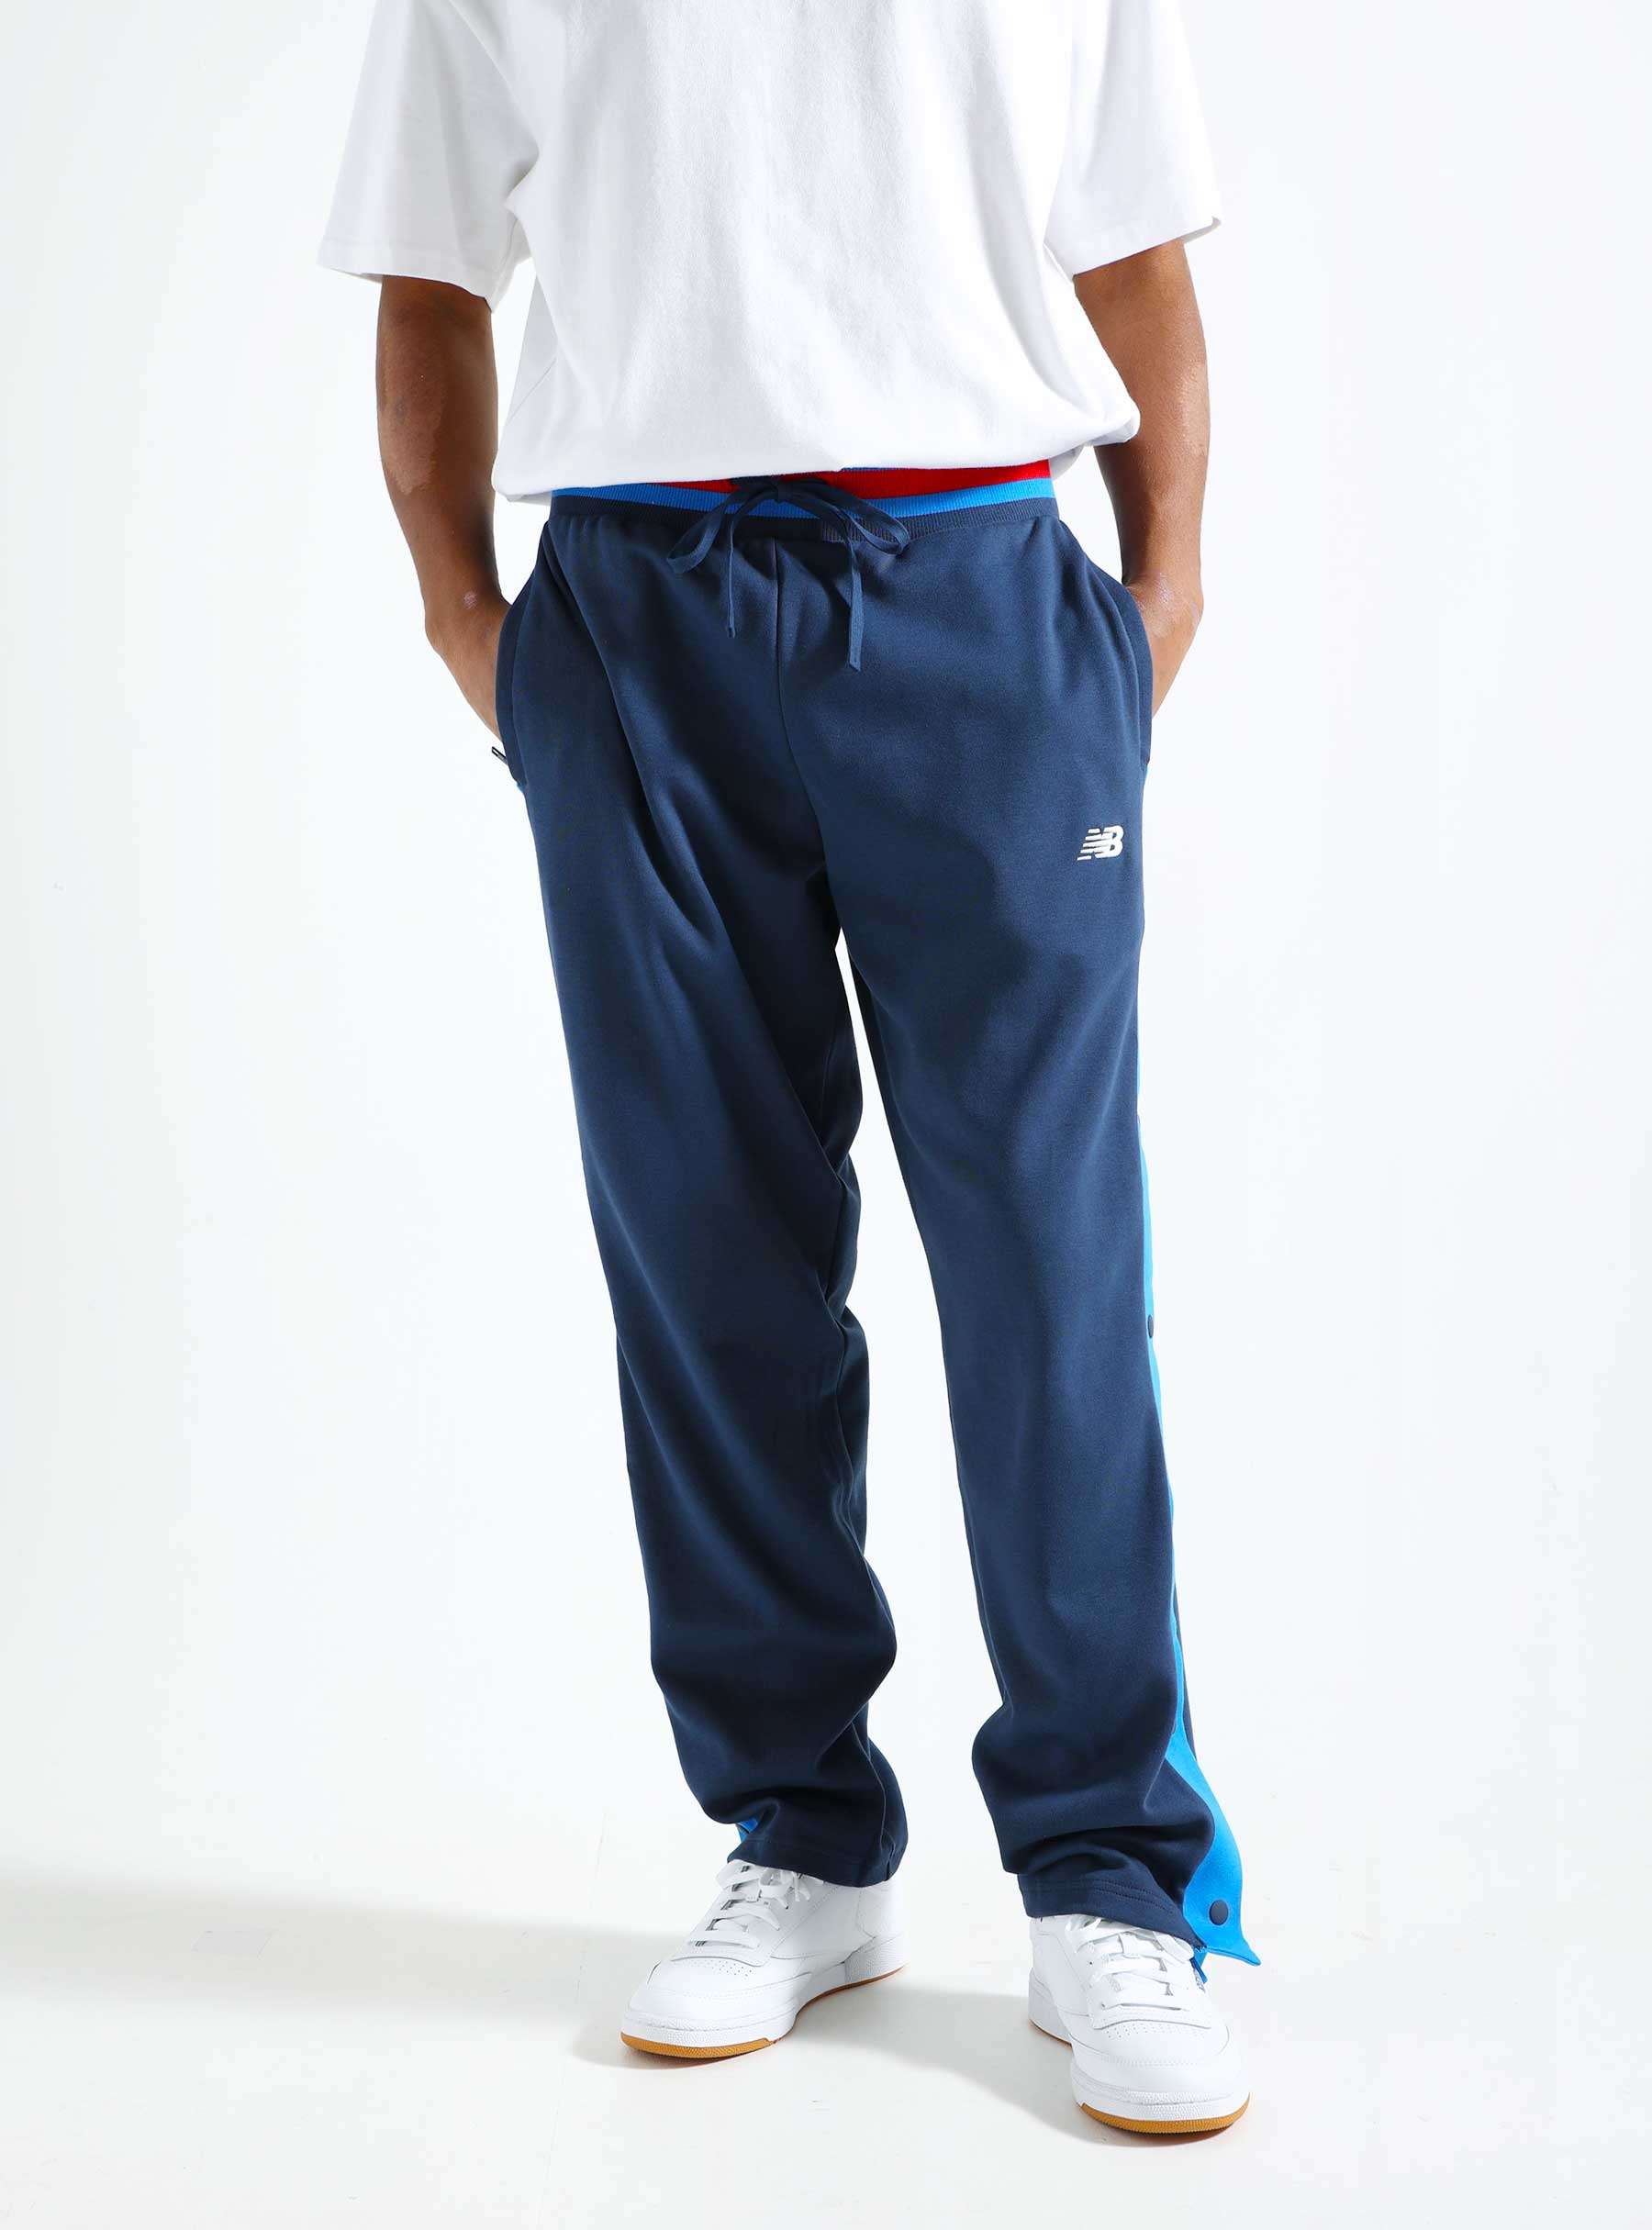 Sportswear Greatest Hits French Terry Pant NB Navy MP41504-NNY